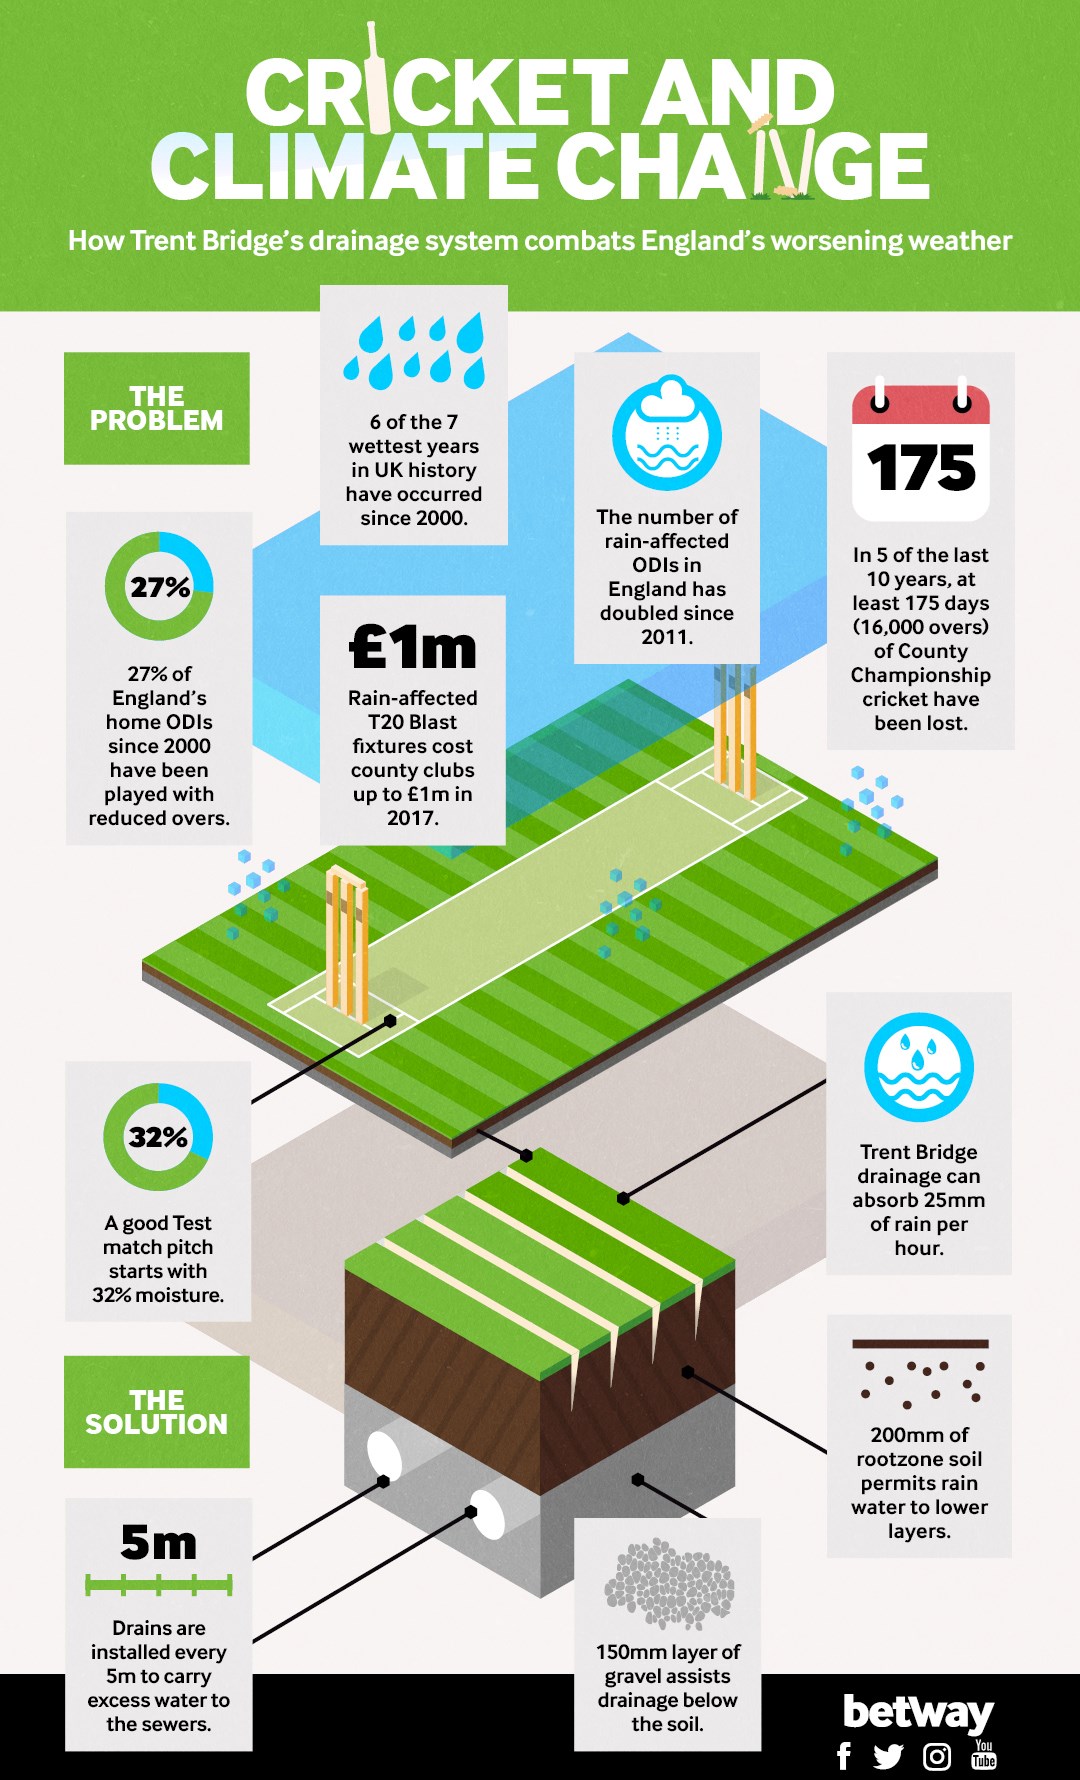 Climate Change In Cricket